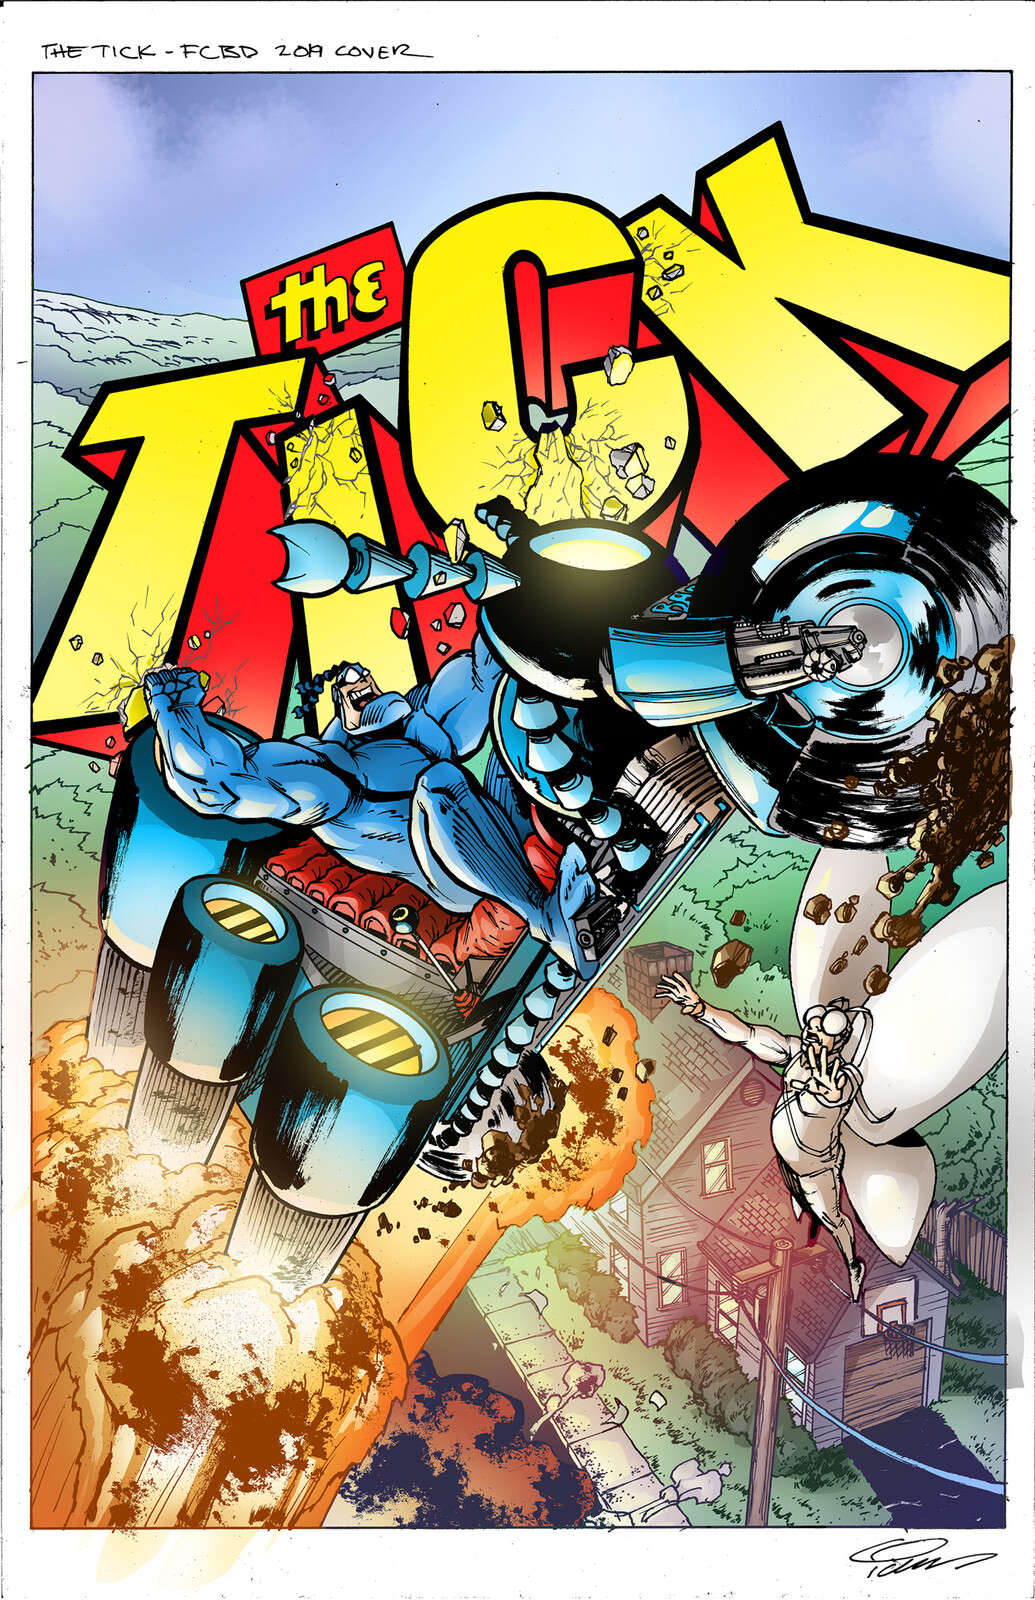 The Tick Free Comic Book Day cover art by Ian Chase Nichols published by New England Comics without the trade dress.